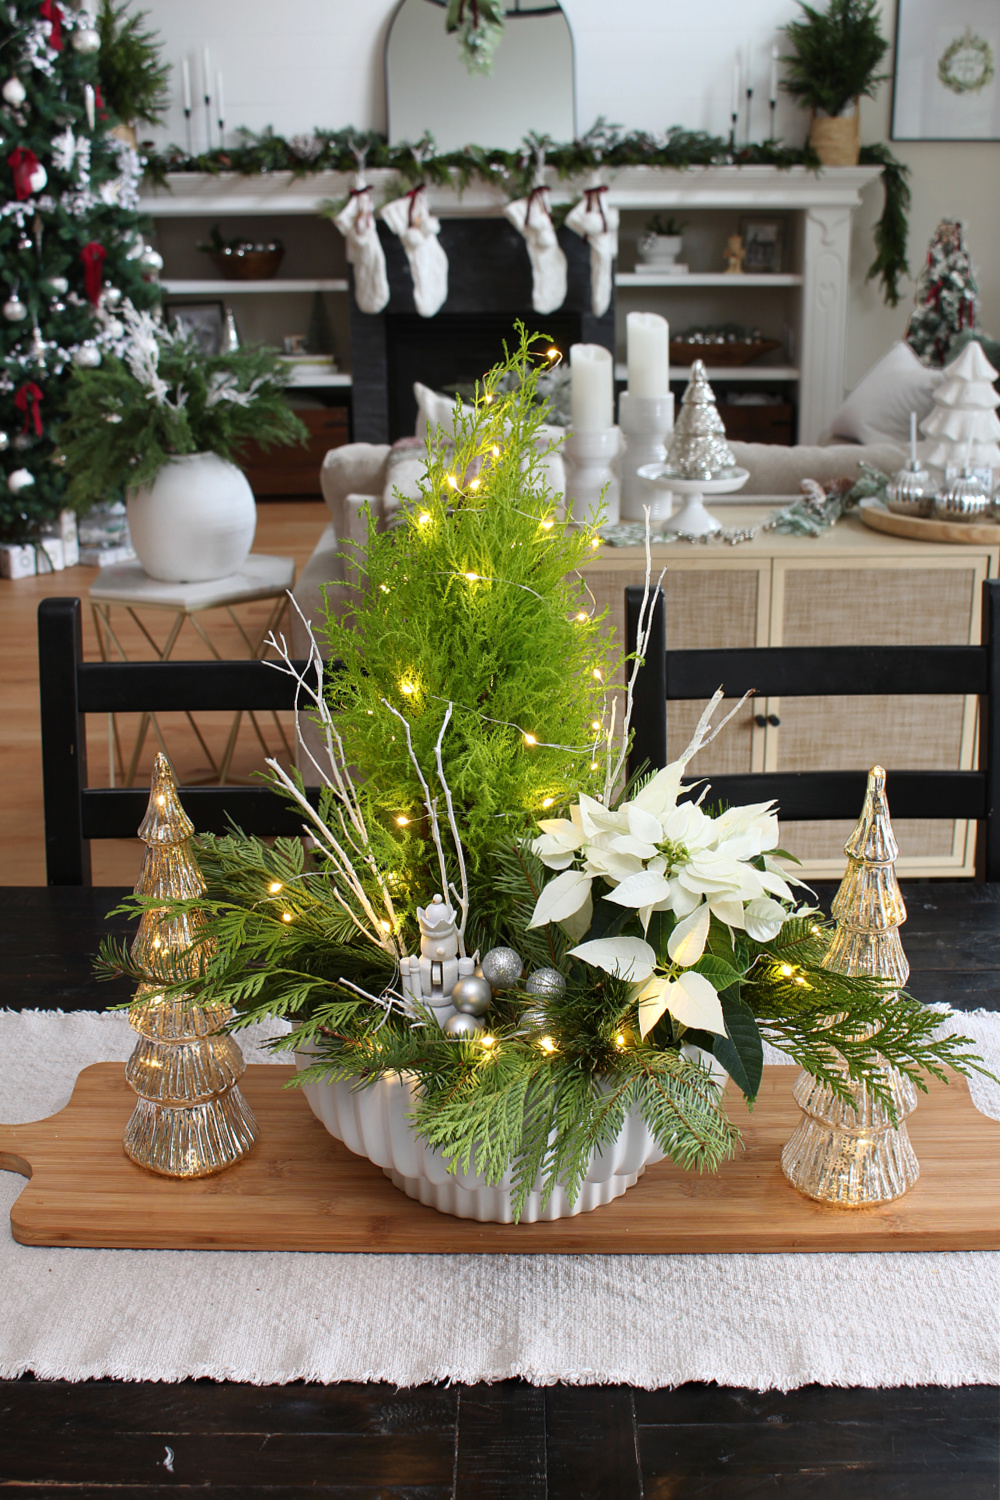 Fresh greenery Christmas centerpiece using a lemon cypress and poinsettia. Embellished with twinkle lights and a nutcracker. #Christmascenterpiece #centerpieceideas #Christmasdecor #Christmascrafts #ChristmasDIY #twinklelights